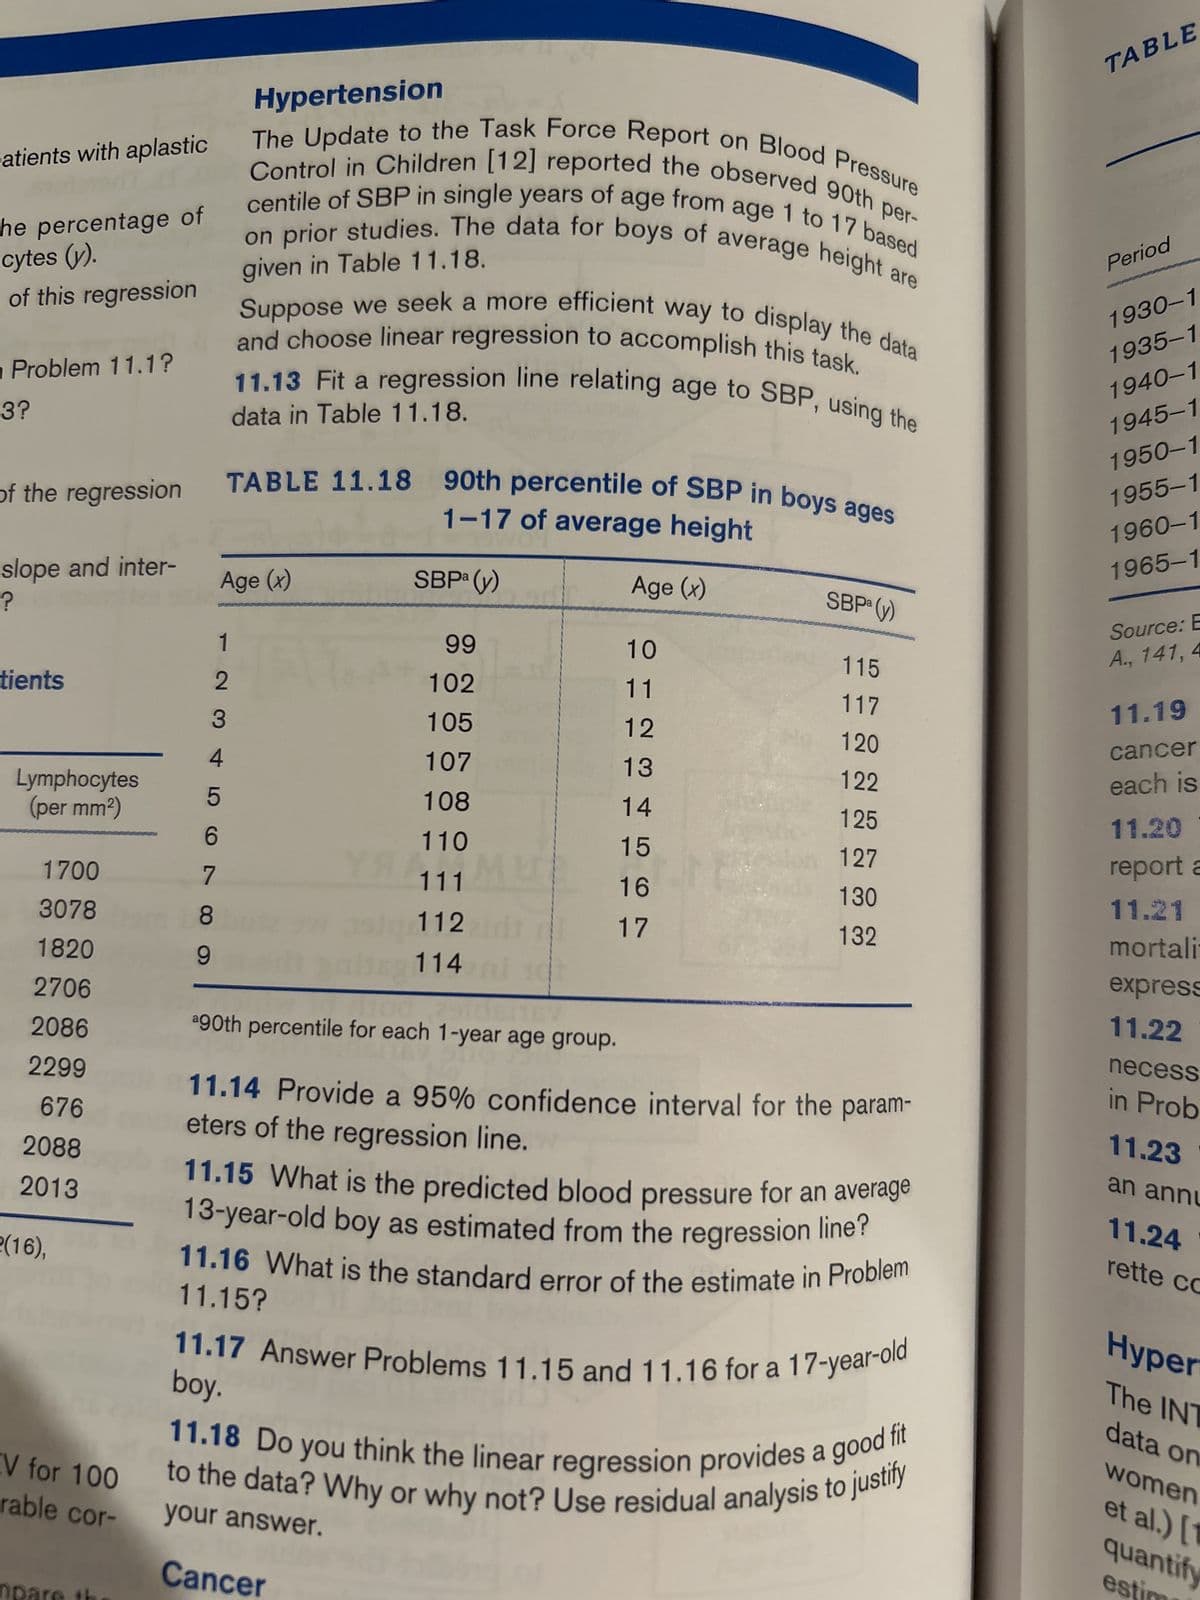 of the regression
slope and inter-
Age (x)
SBPa (y)
patients with aplastic
he percentage of
cytes (y).
of this regression
Problem 11.1?
3?
Hypertension
The Update to the Task Force Report on Blood Pressure
O Control in Children [12] reported the observed 90th per-
centile of SBP in single years of age from age 1 to 17 based
on prior studies. The data for boys of average height a
given in Table 11.18.
are
Suppose we seek a more efficient way to display the data
and choose linear regression to accomplish this task.
11.13 Fit a regression line relating age to SBP, using the
data in Table 11.18.
TABLE 11.18 90th percentile of SBP in boys ages
1-17 of average height
TABLE
Period
1930-1
1935-1
1940-1
1945-1
1950-1
1955-1
1960-1
1965-1
Age (x)
?
SBPa (y)
Source: E
1
99
10
115
A., 141, 4
tients
2
102
11
117
3
105
12
120
4
107
13
Lymphocytes
122
5
11.19
cancer
each is
(per mm²)
108
14
125
6
110
15
127
1700
7
11.20
report a
111
16
130
3078
8
11.21
112
17
132
1820
9
mortali
114
2706
2086
2299
express
11.22
necess
676
2088
2013
(16),
EV for 100
rable cor-
a90th percentile for each 1-year age group.
11.14 Provide a 95% confidence interval for the param-
eters of the regression line.
11.15 What is the predicted blood pressure for an average
13-year-old boy as estimated from the regression line?
11.16 What is the standard error of the estimate in Problem
11.15?
11.17 Answer Problems 11.15 and 11.16 for a 17-year-old
boy.
11.18 Do you think the linear regression provides a good fit
to the data? Why or why not? Use residual analysis to justify
your answer.
Cancer
in Prob
11.23
an annu
11.24
rette co
Hyper
The INT
data on
women
et al.) [1
quantify
est